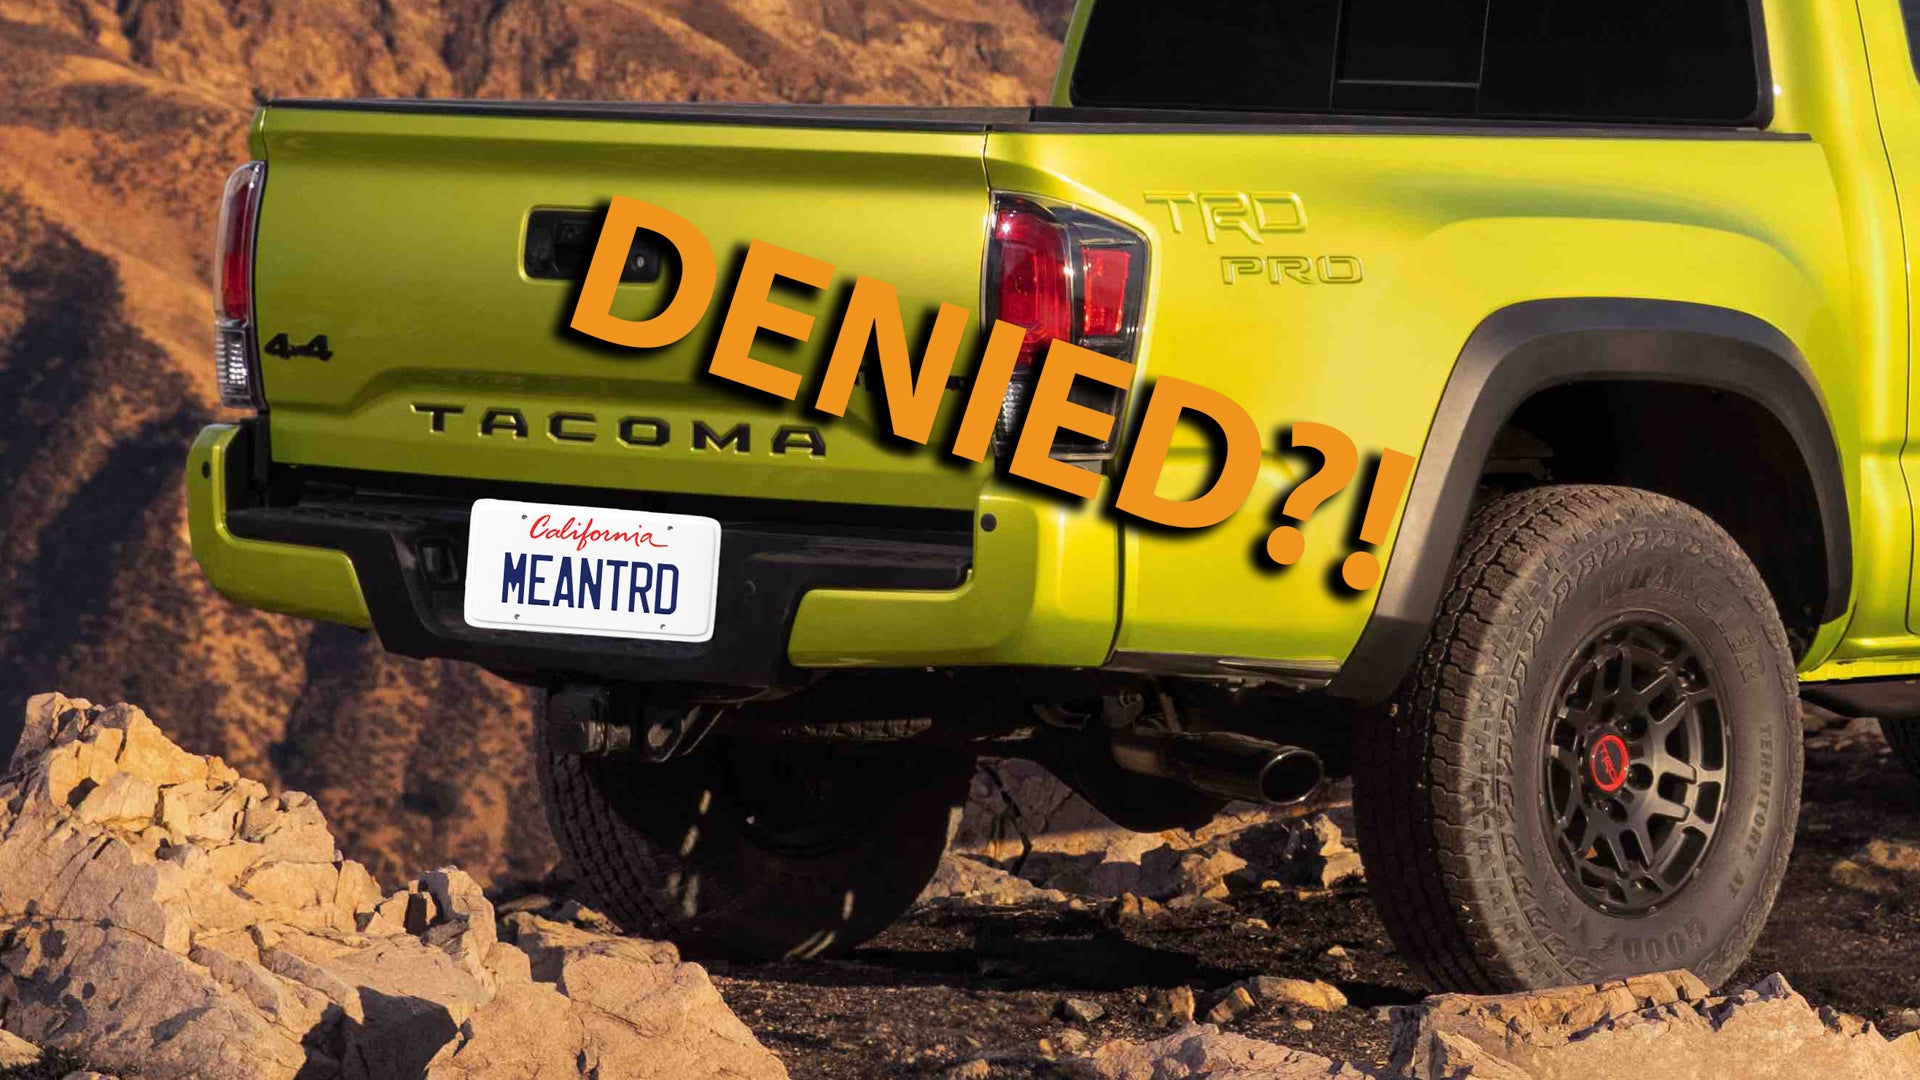 This Twitter Account Posting Rejected Vanity Plate Applications Is the Distraction You Need Today